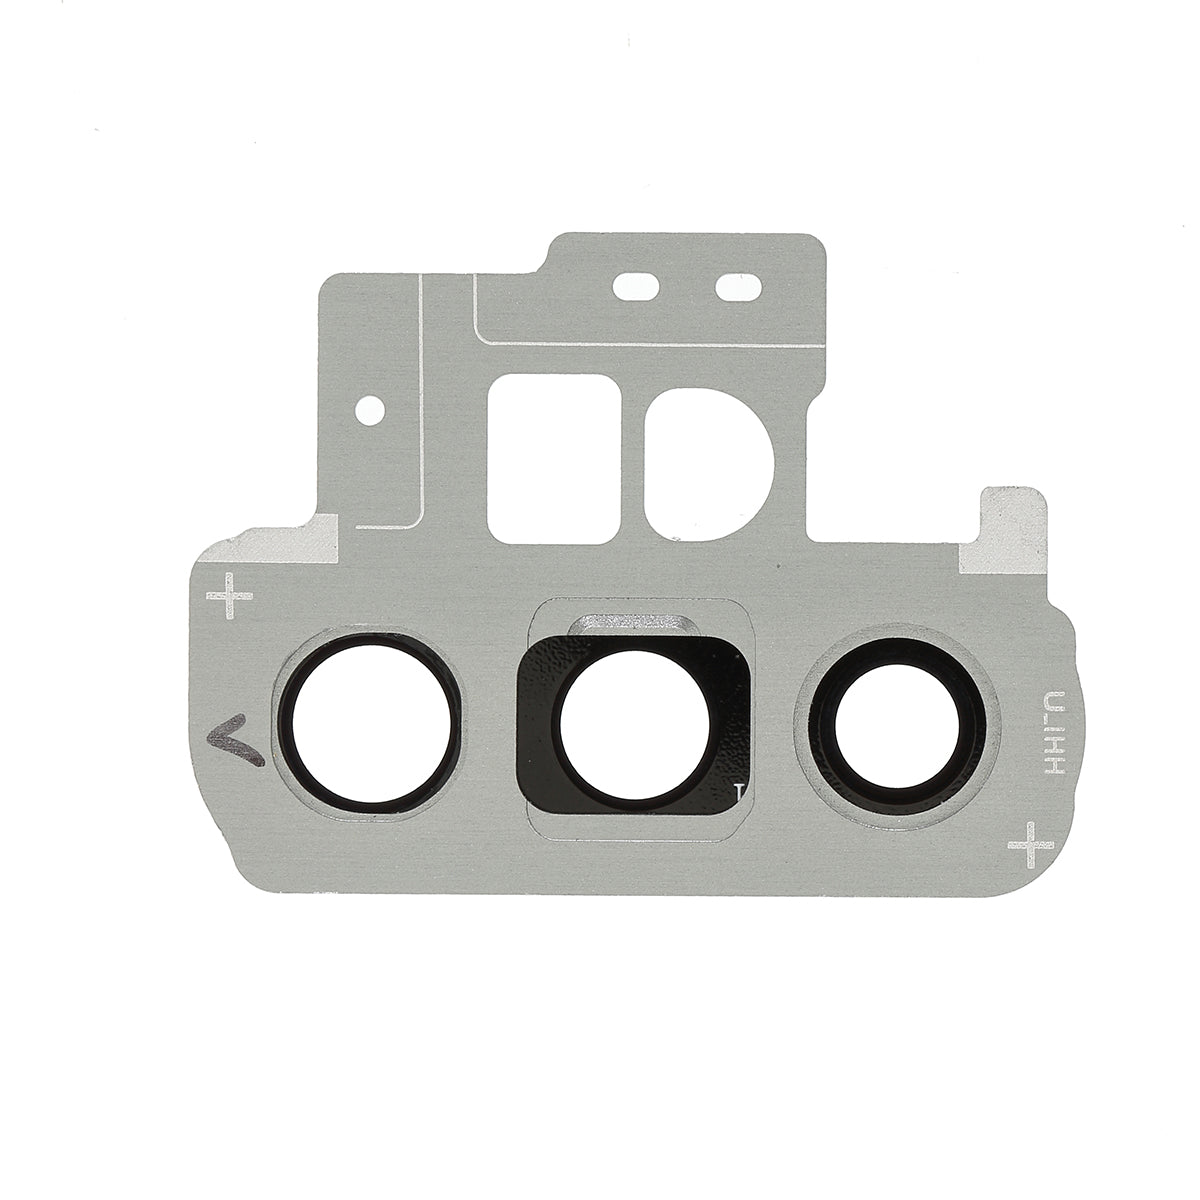 OEM Rear Camera Lens Ring Cover Replacement Part for Samsung Galaxy Note 10 Plus SM-N975 - Grey